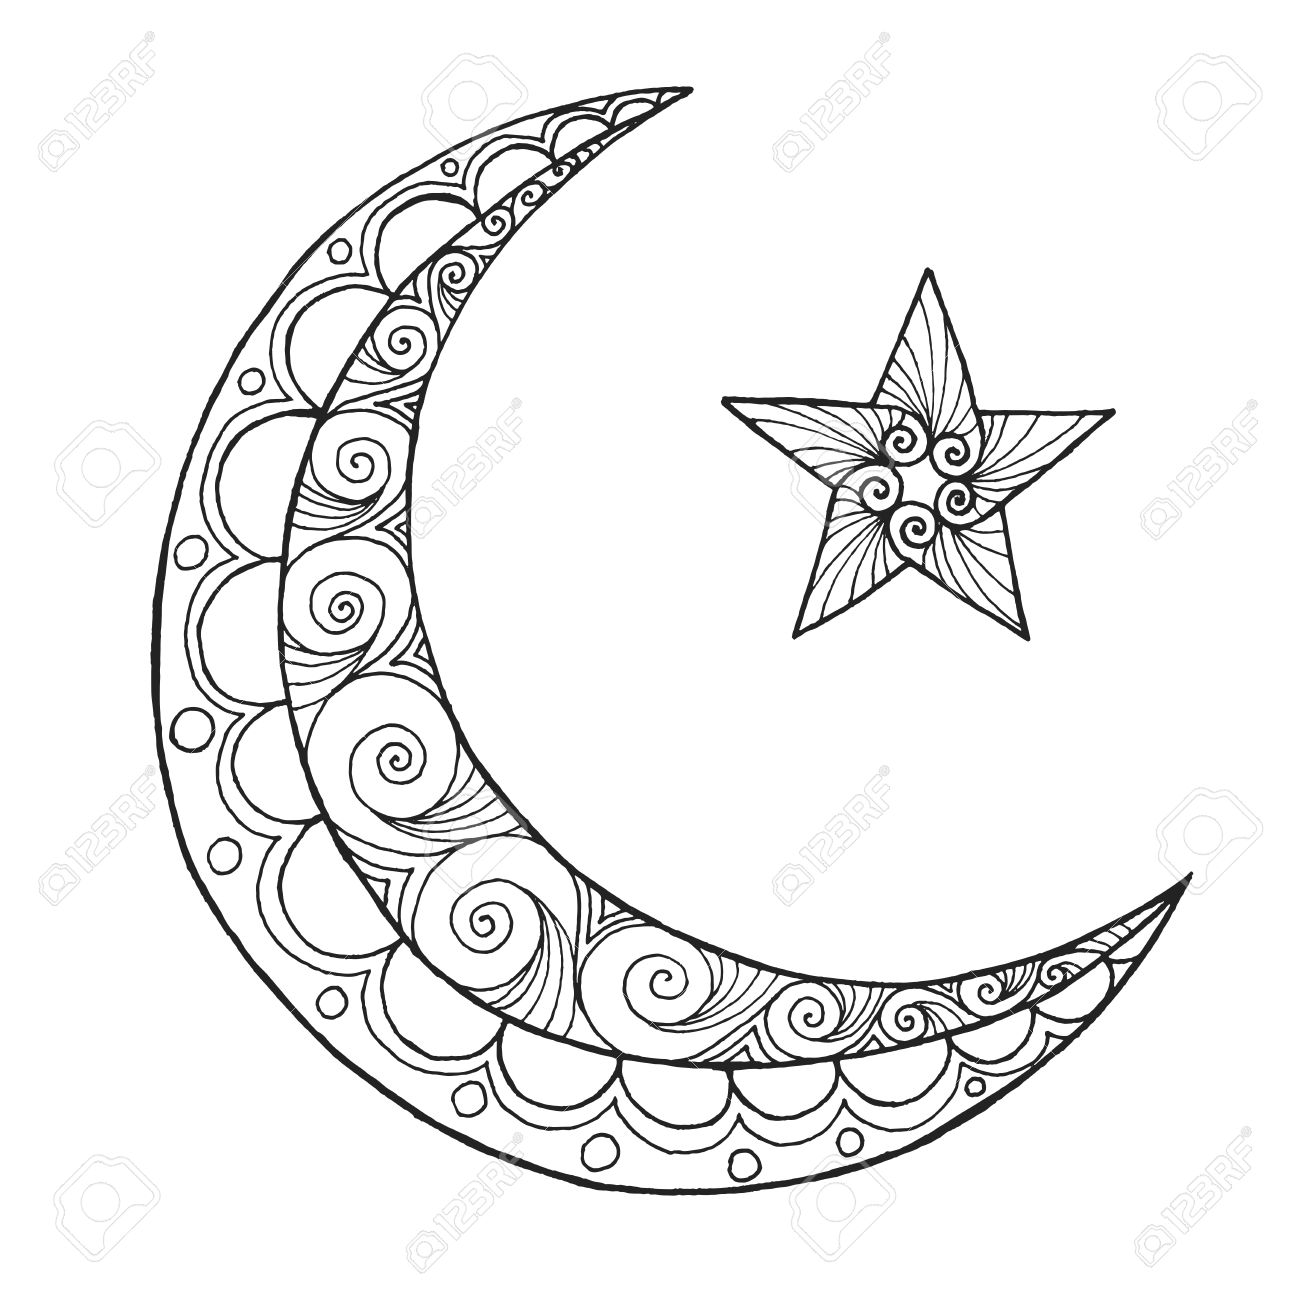 Half Moon Coloring Pages at GetColorings.com | Free printable colorings